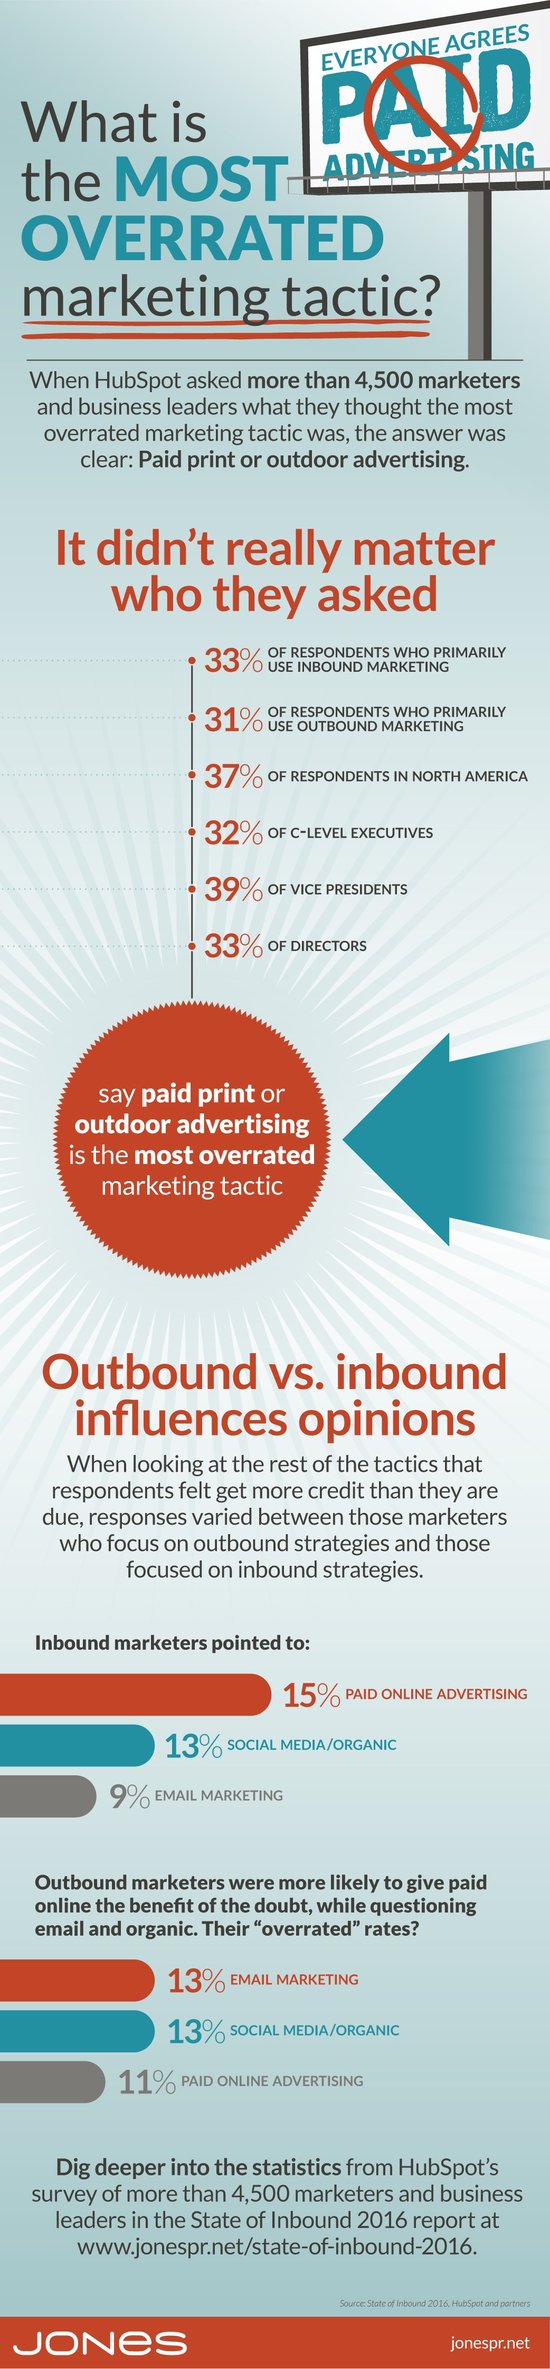 Even Outbound Marketers Say Paid Advertising Is Overrated (Infographic)